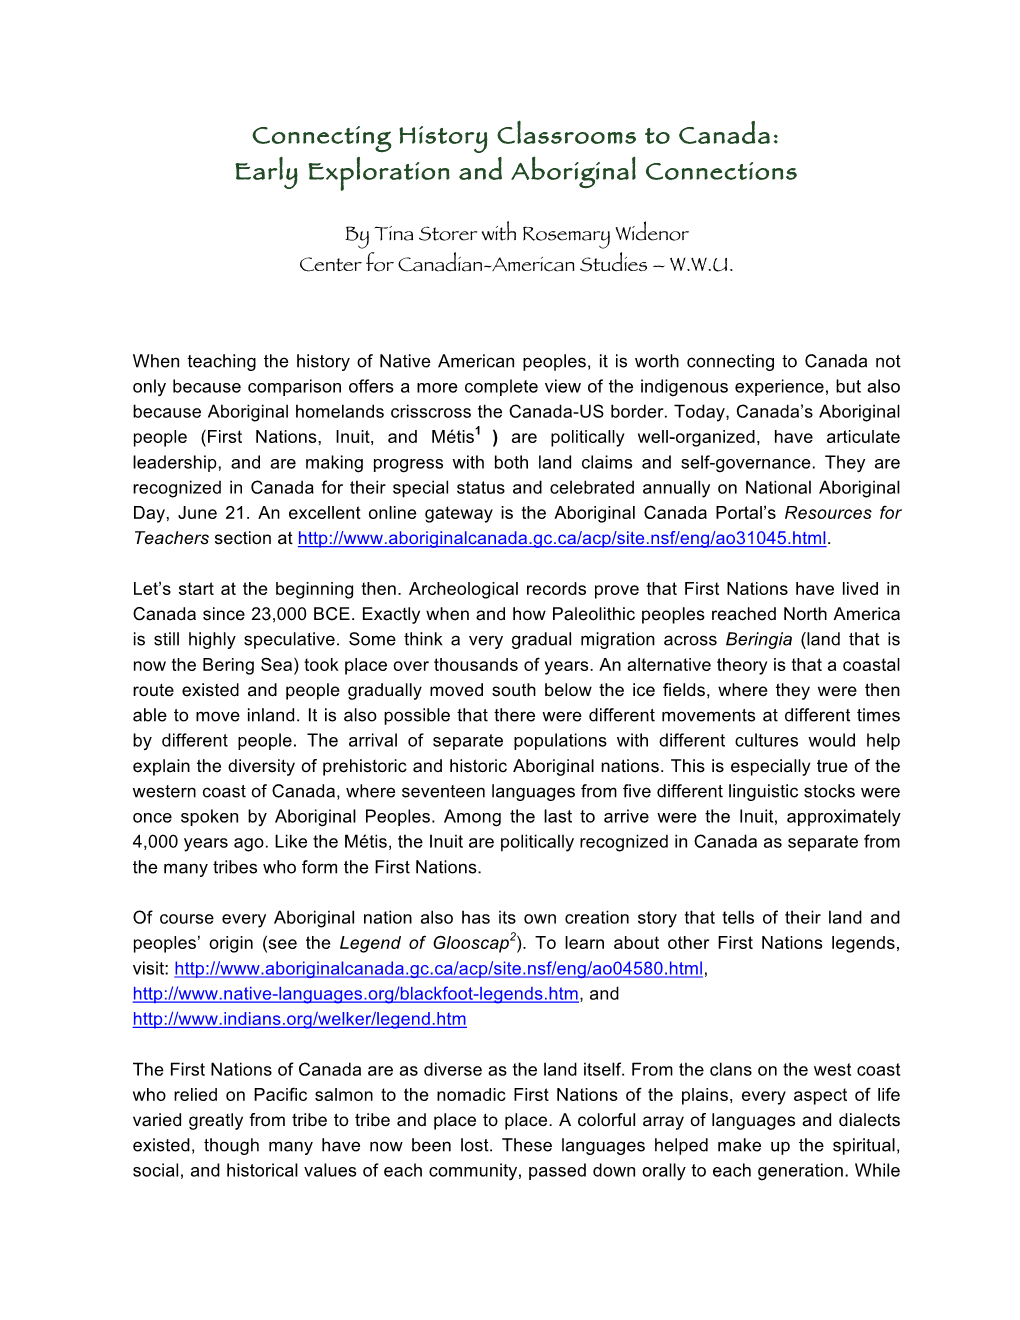 Early Exploration and Aboriginal Connections